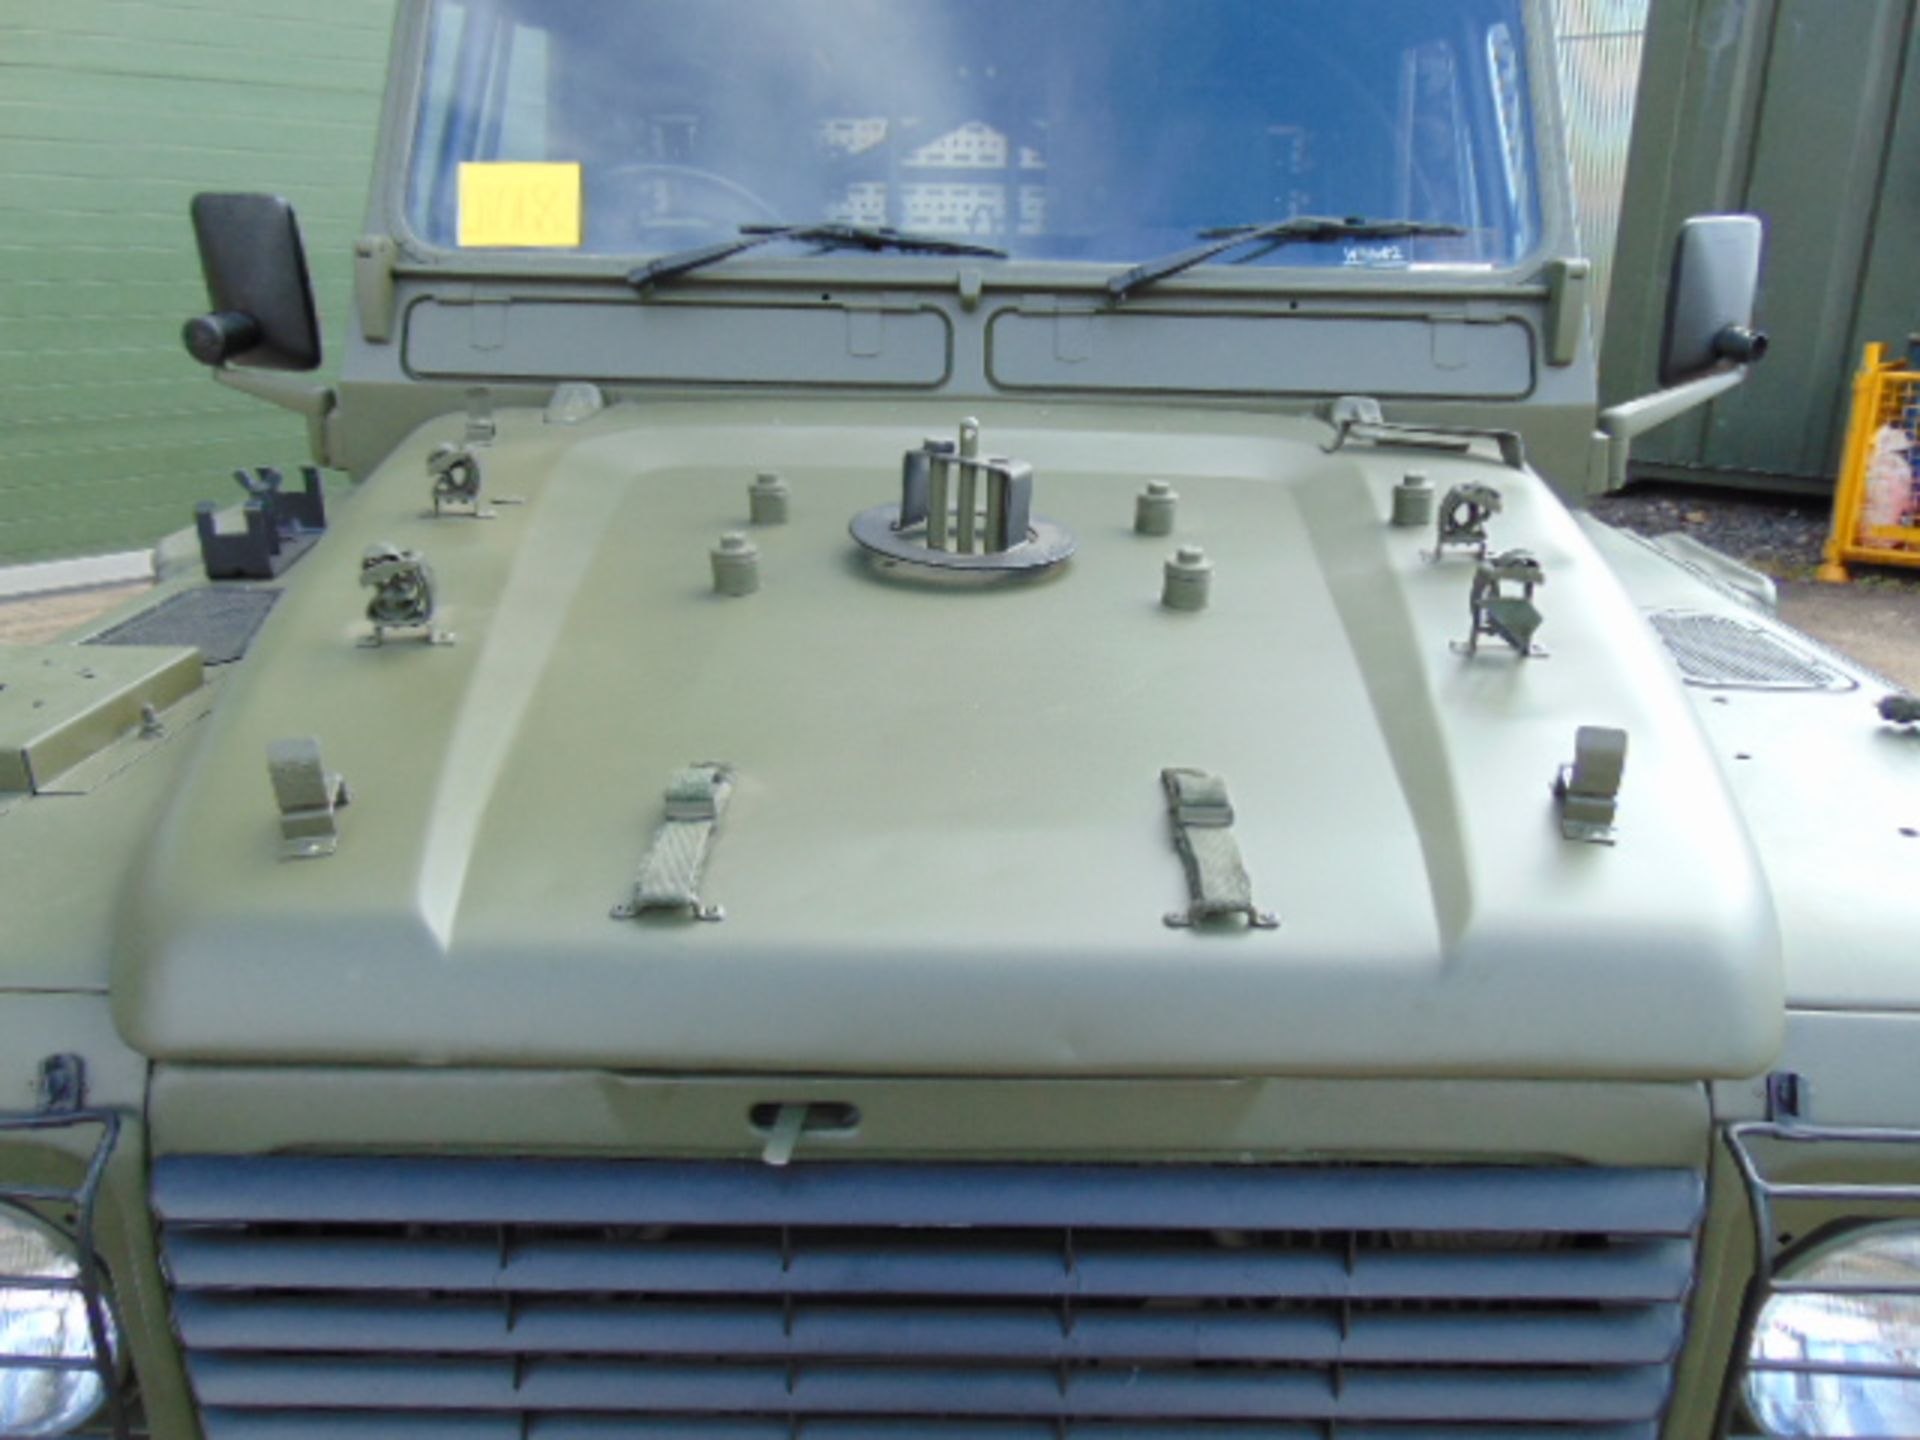 1998 Land Rover Wolf 110 Hard Top with Remus upgrade - Image 9 of 32